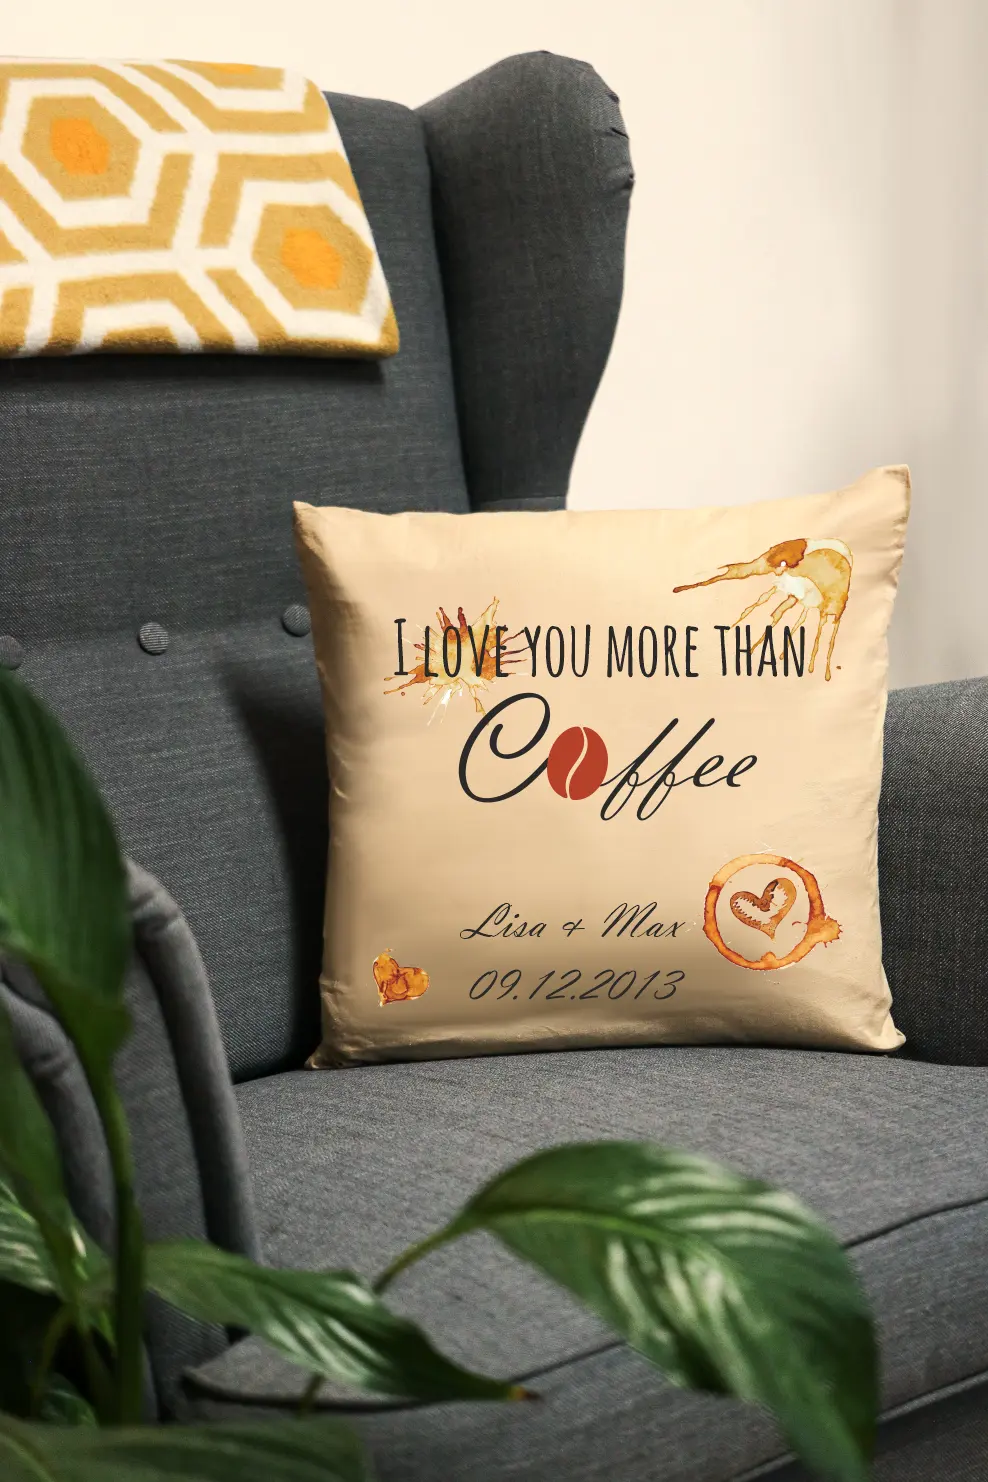 I love you more than coffee | Polster/Kissen   